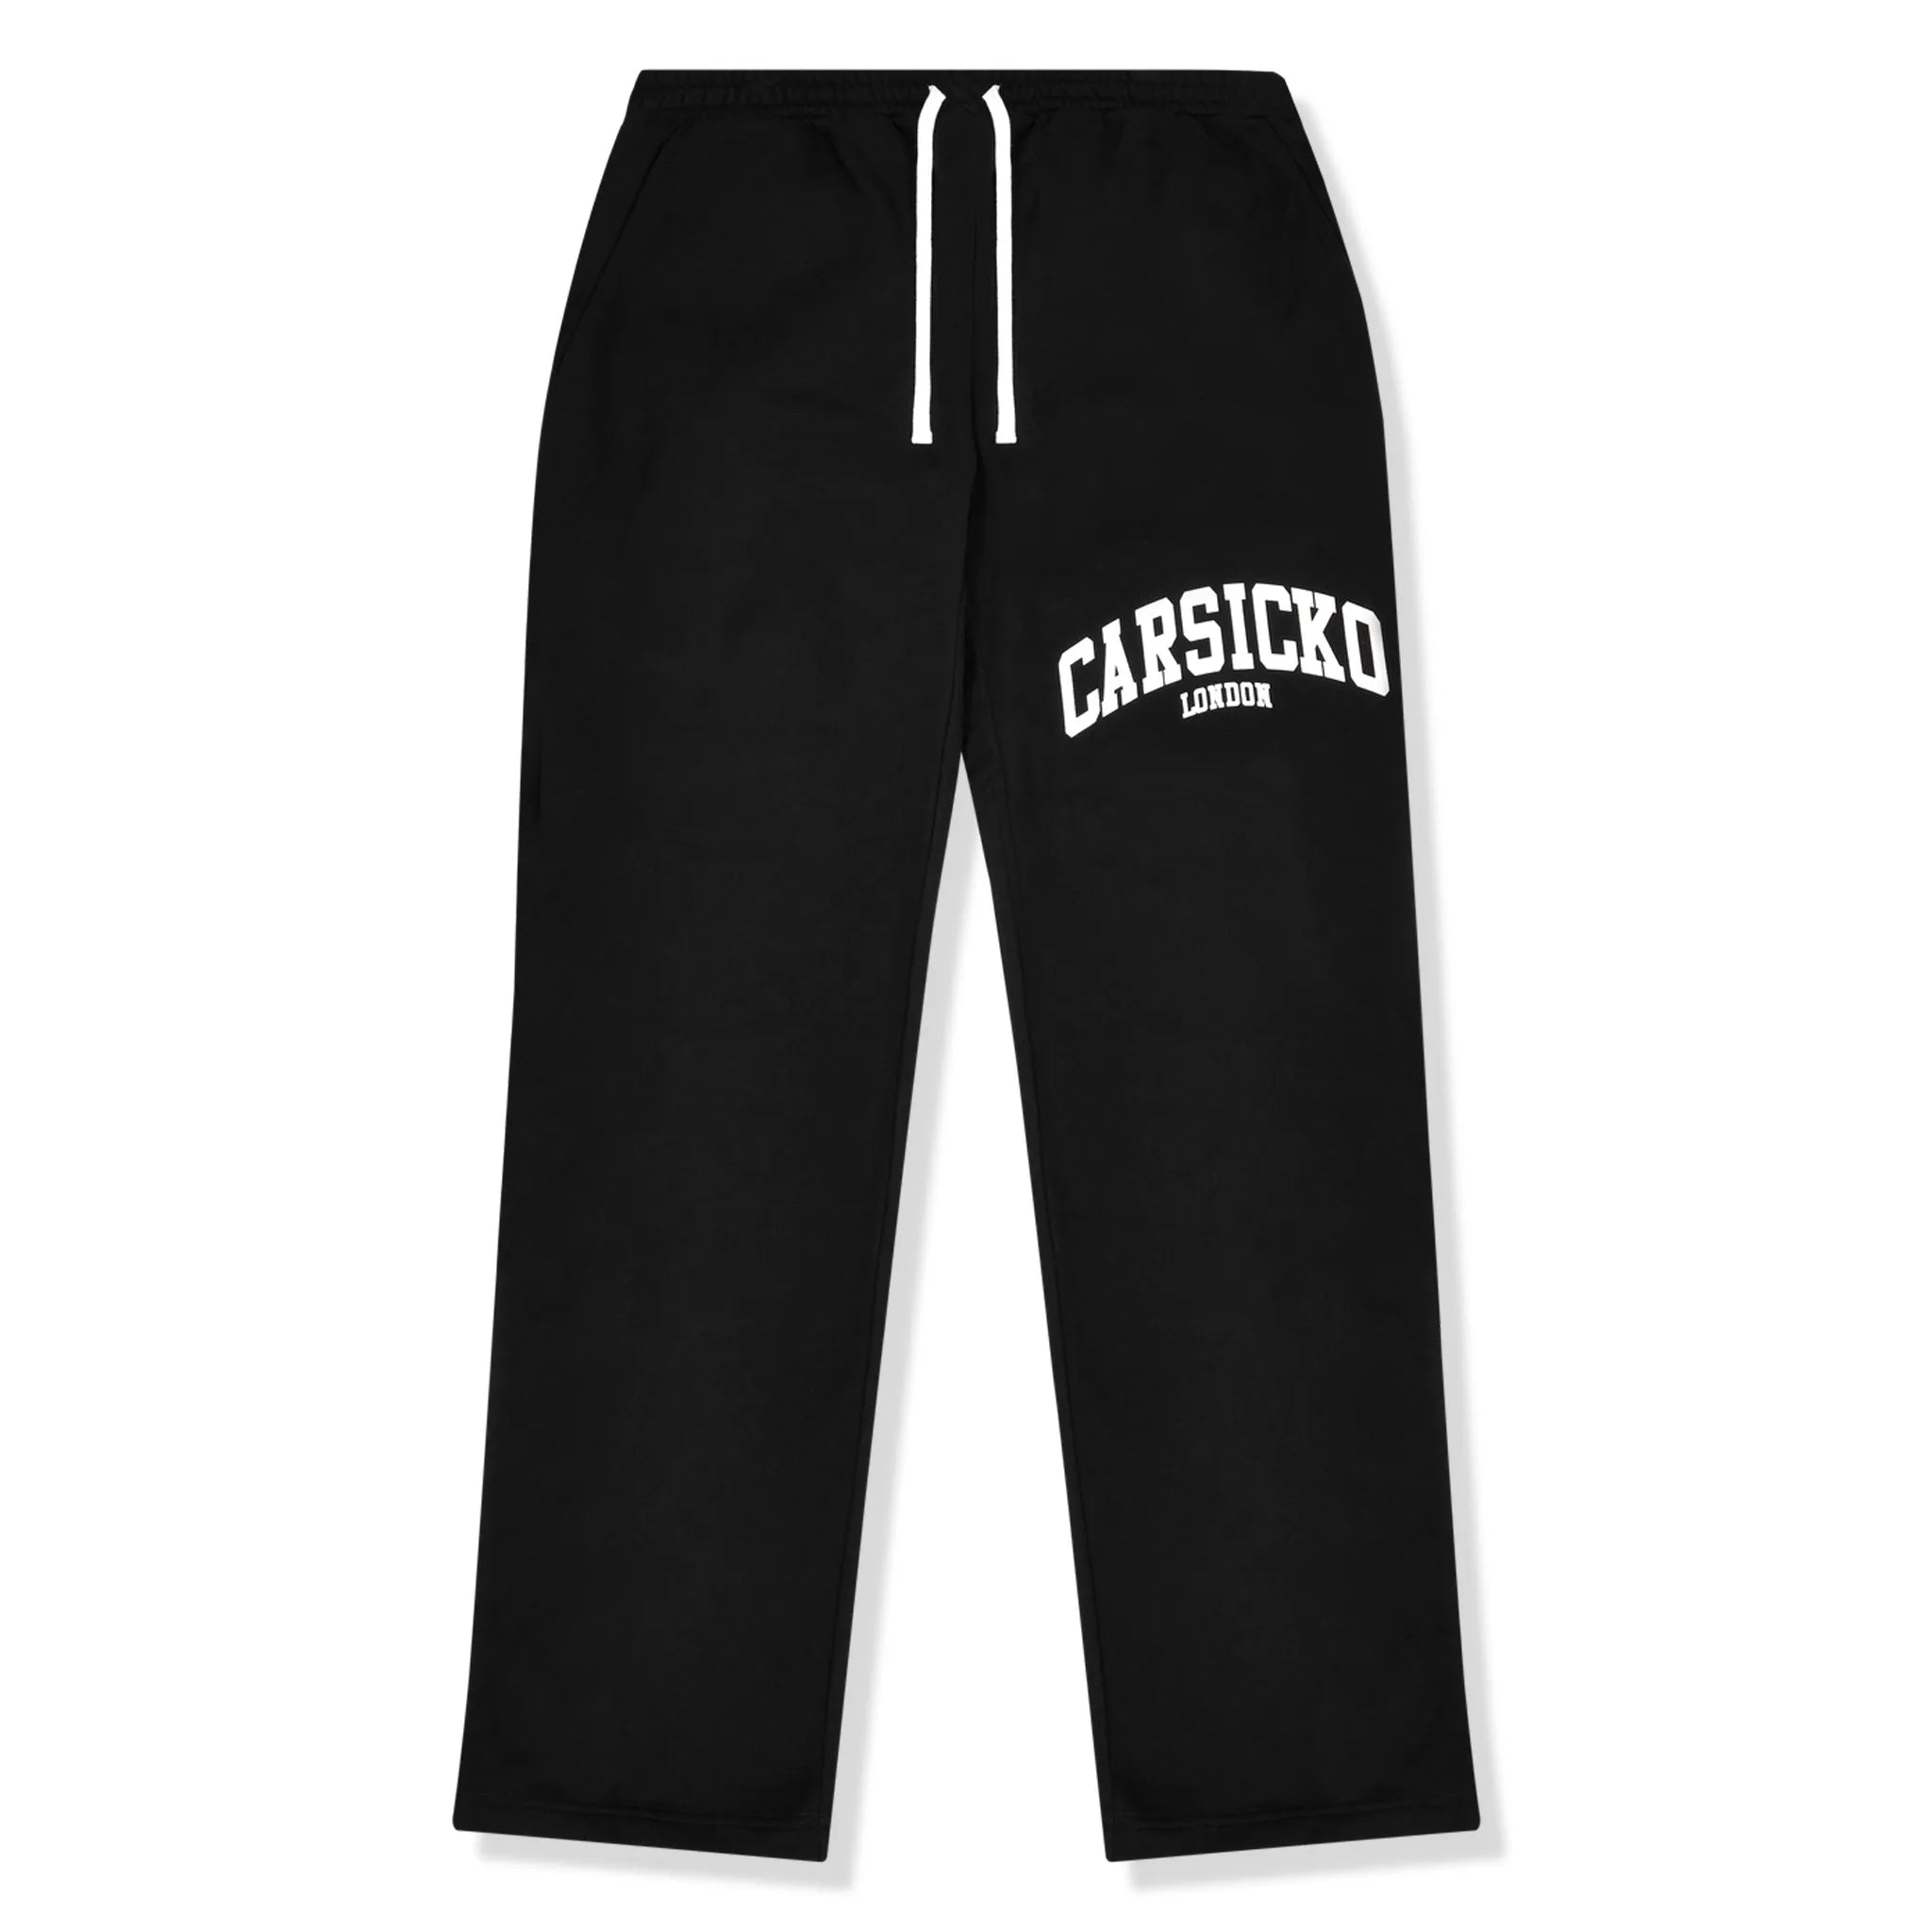 Front view of Carsicko London Black Track Pants